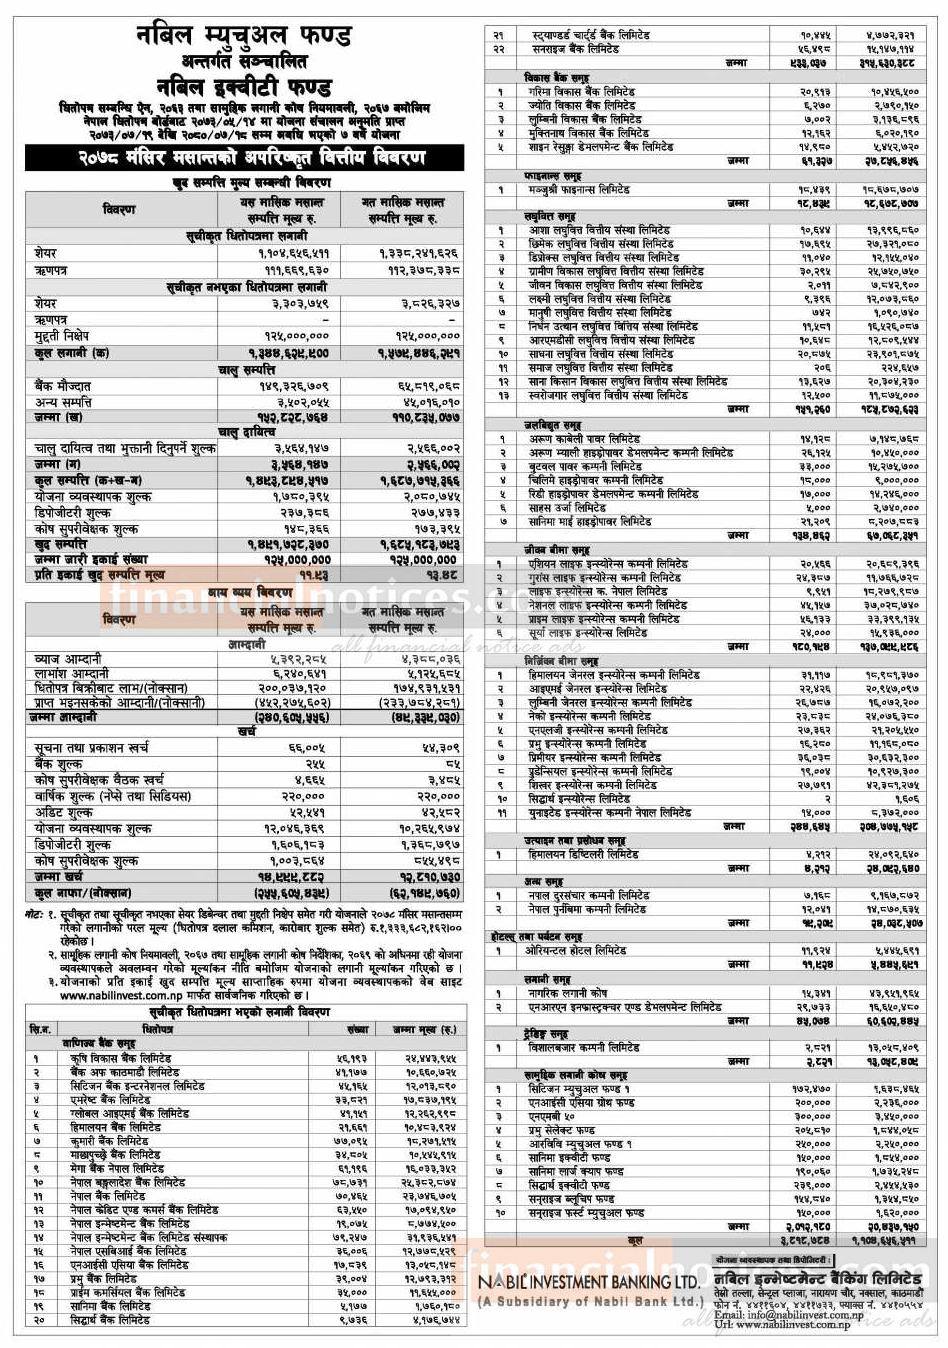 Nabil Investment has published 'Nabil Equity Fund' NAV up to Mangsir, 2078.